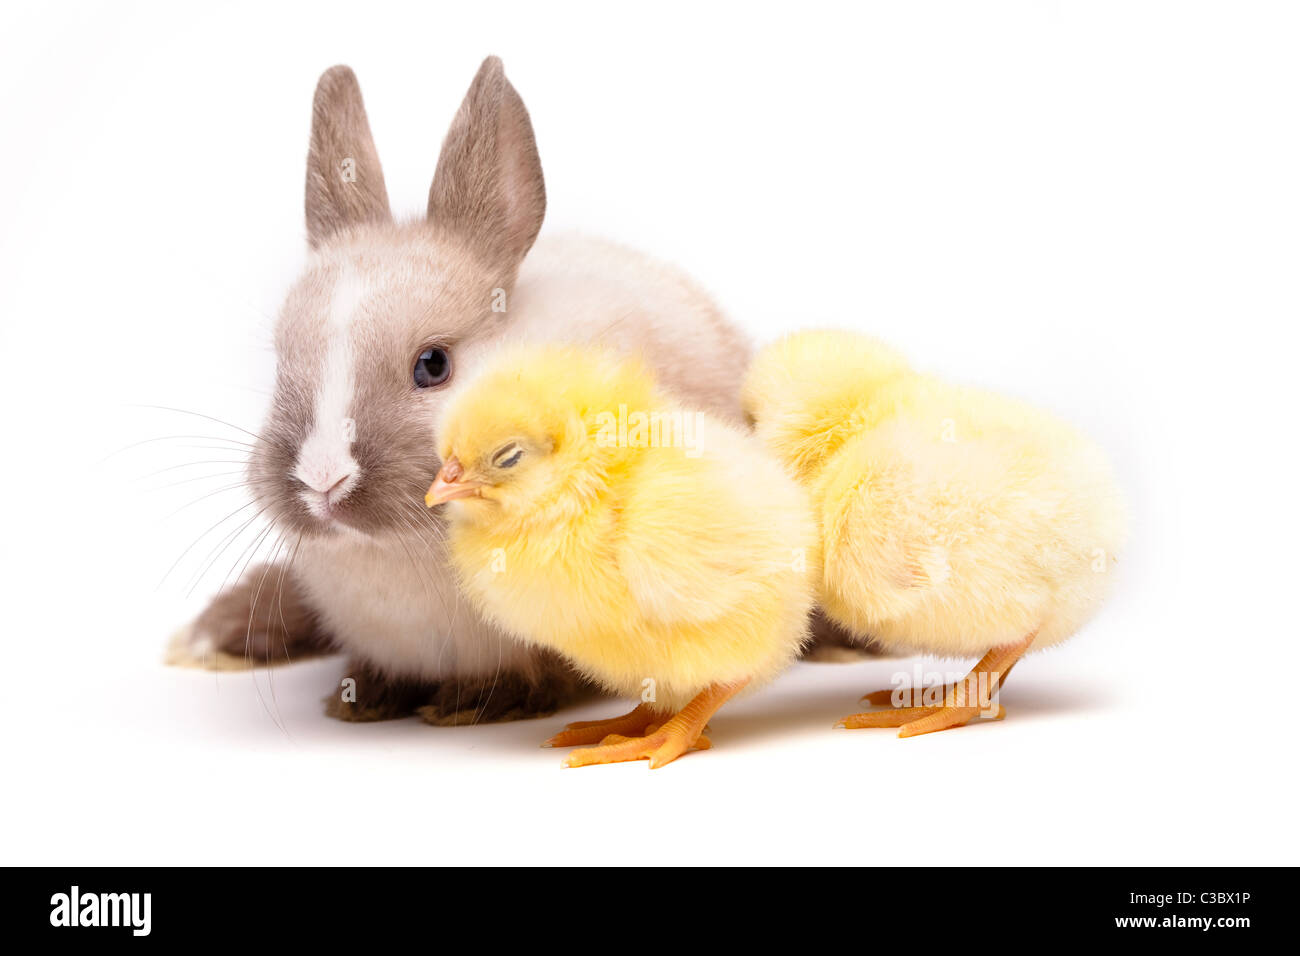 Yellow Chick and bunny over white background Stock Photo